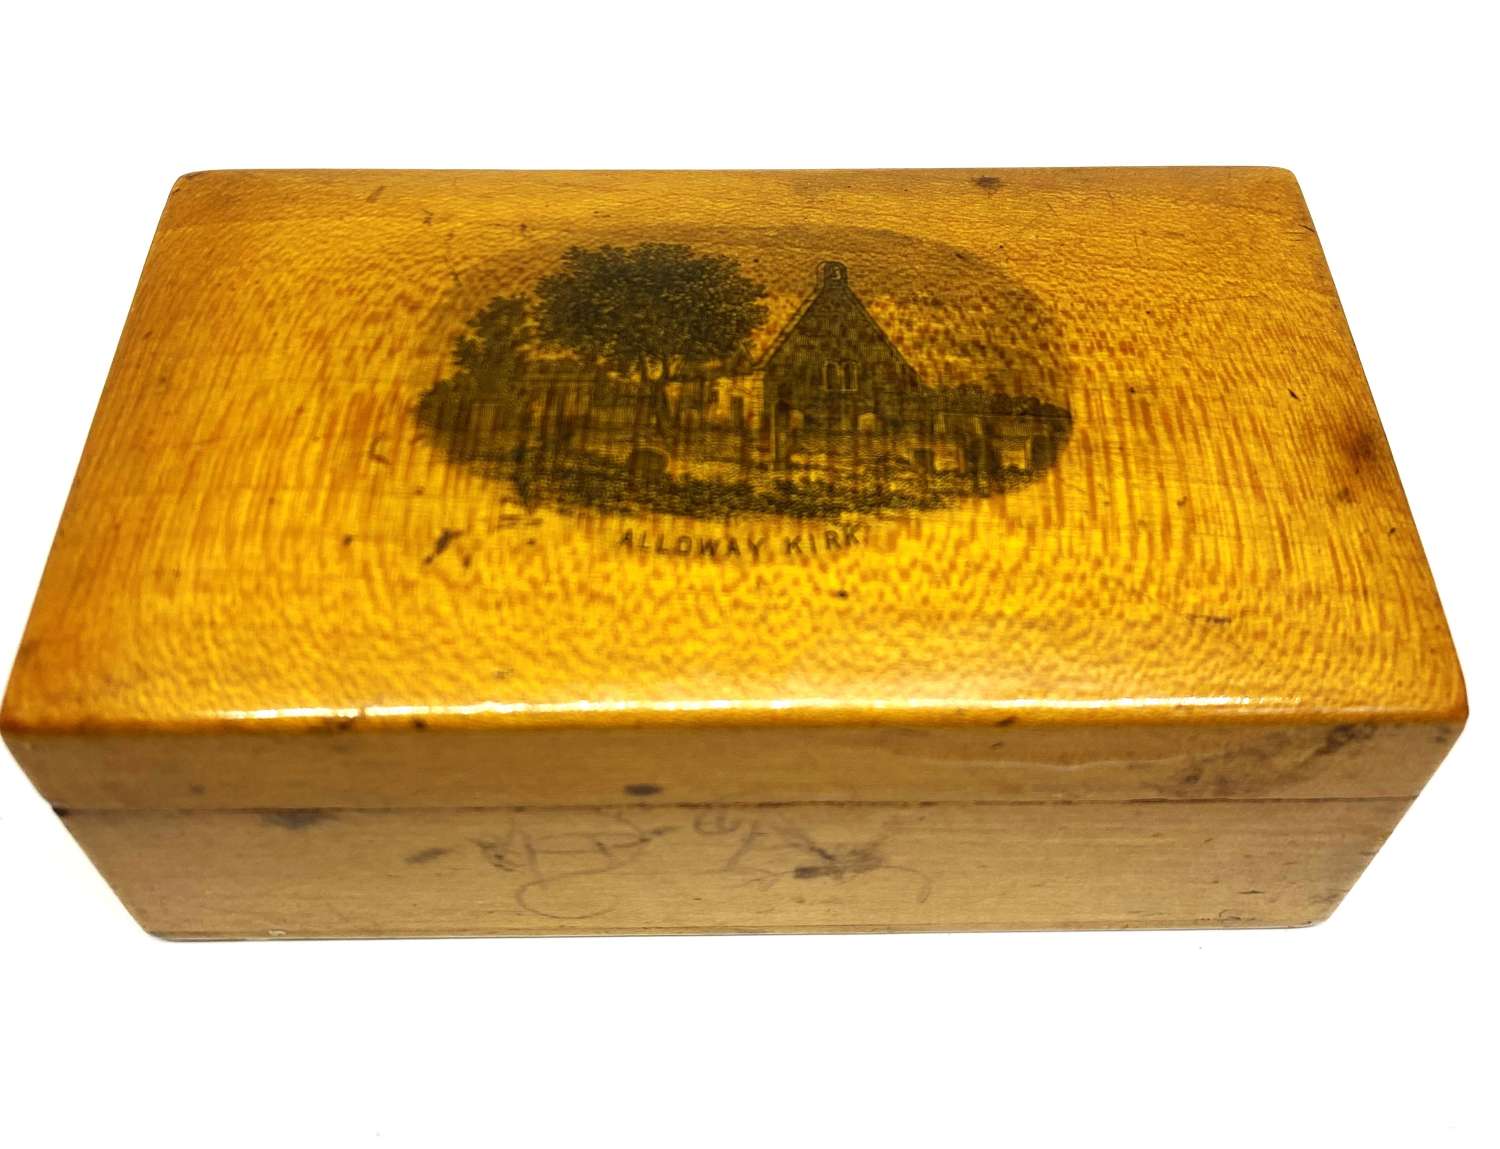 Mauchline Ware Thread Reel Box For Alloway Kirk